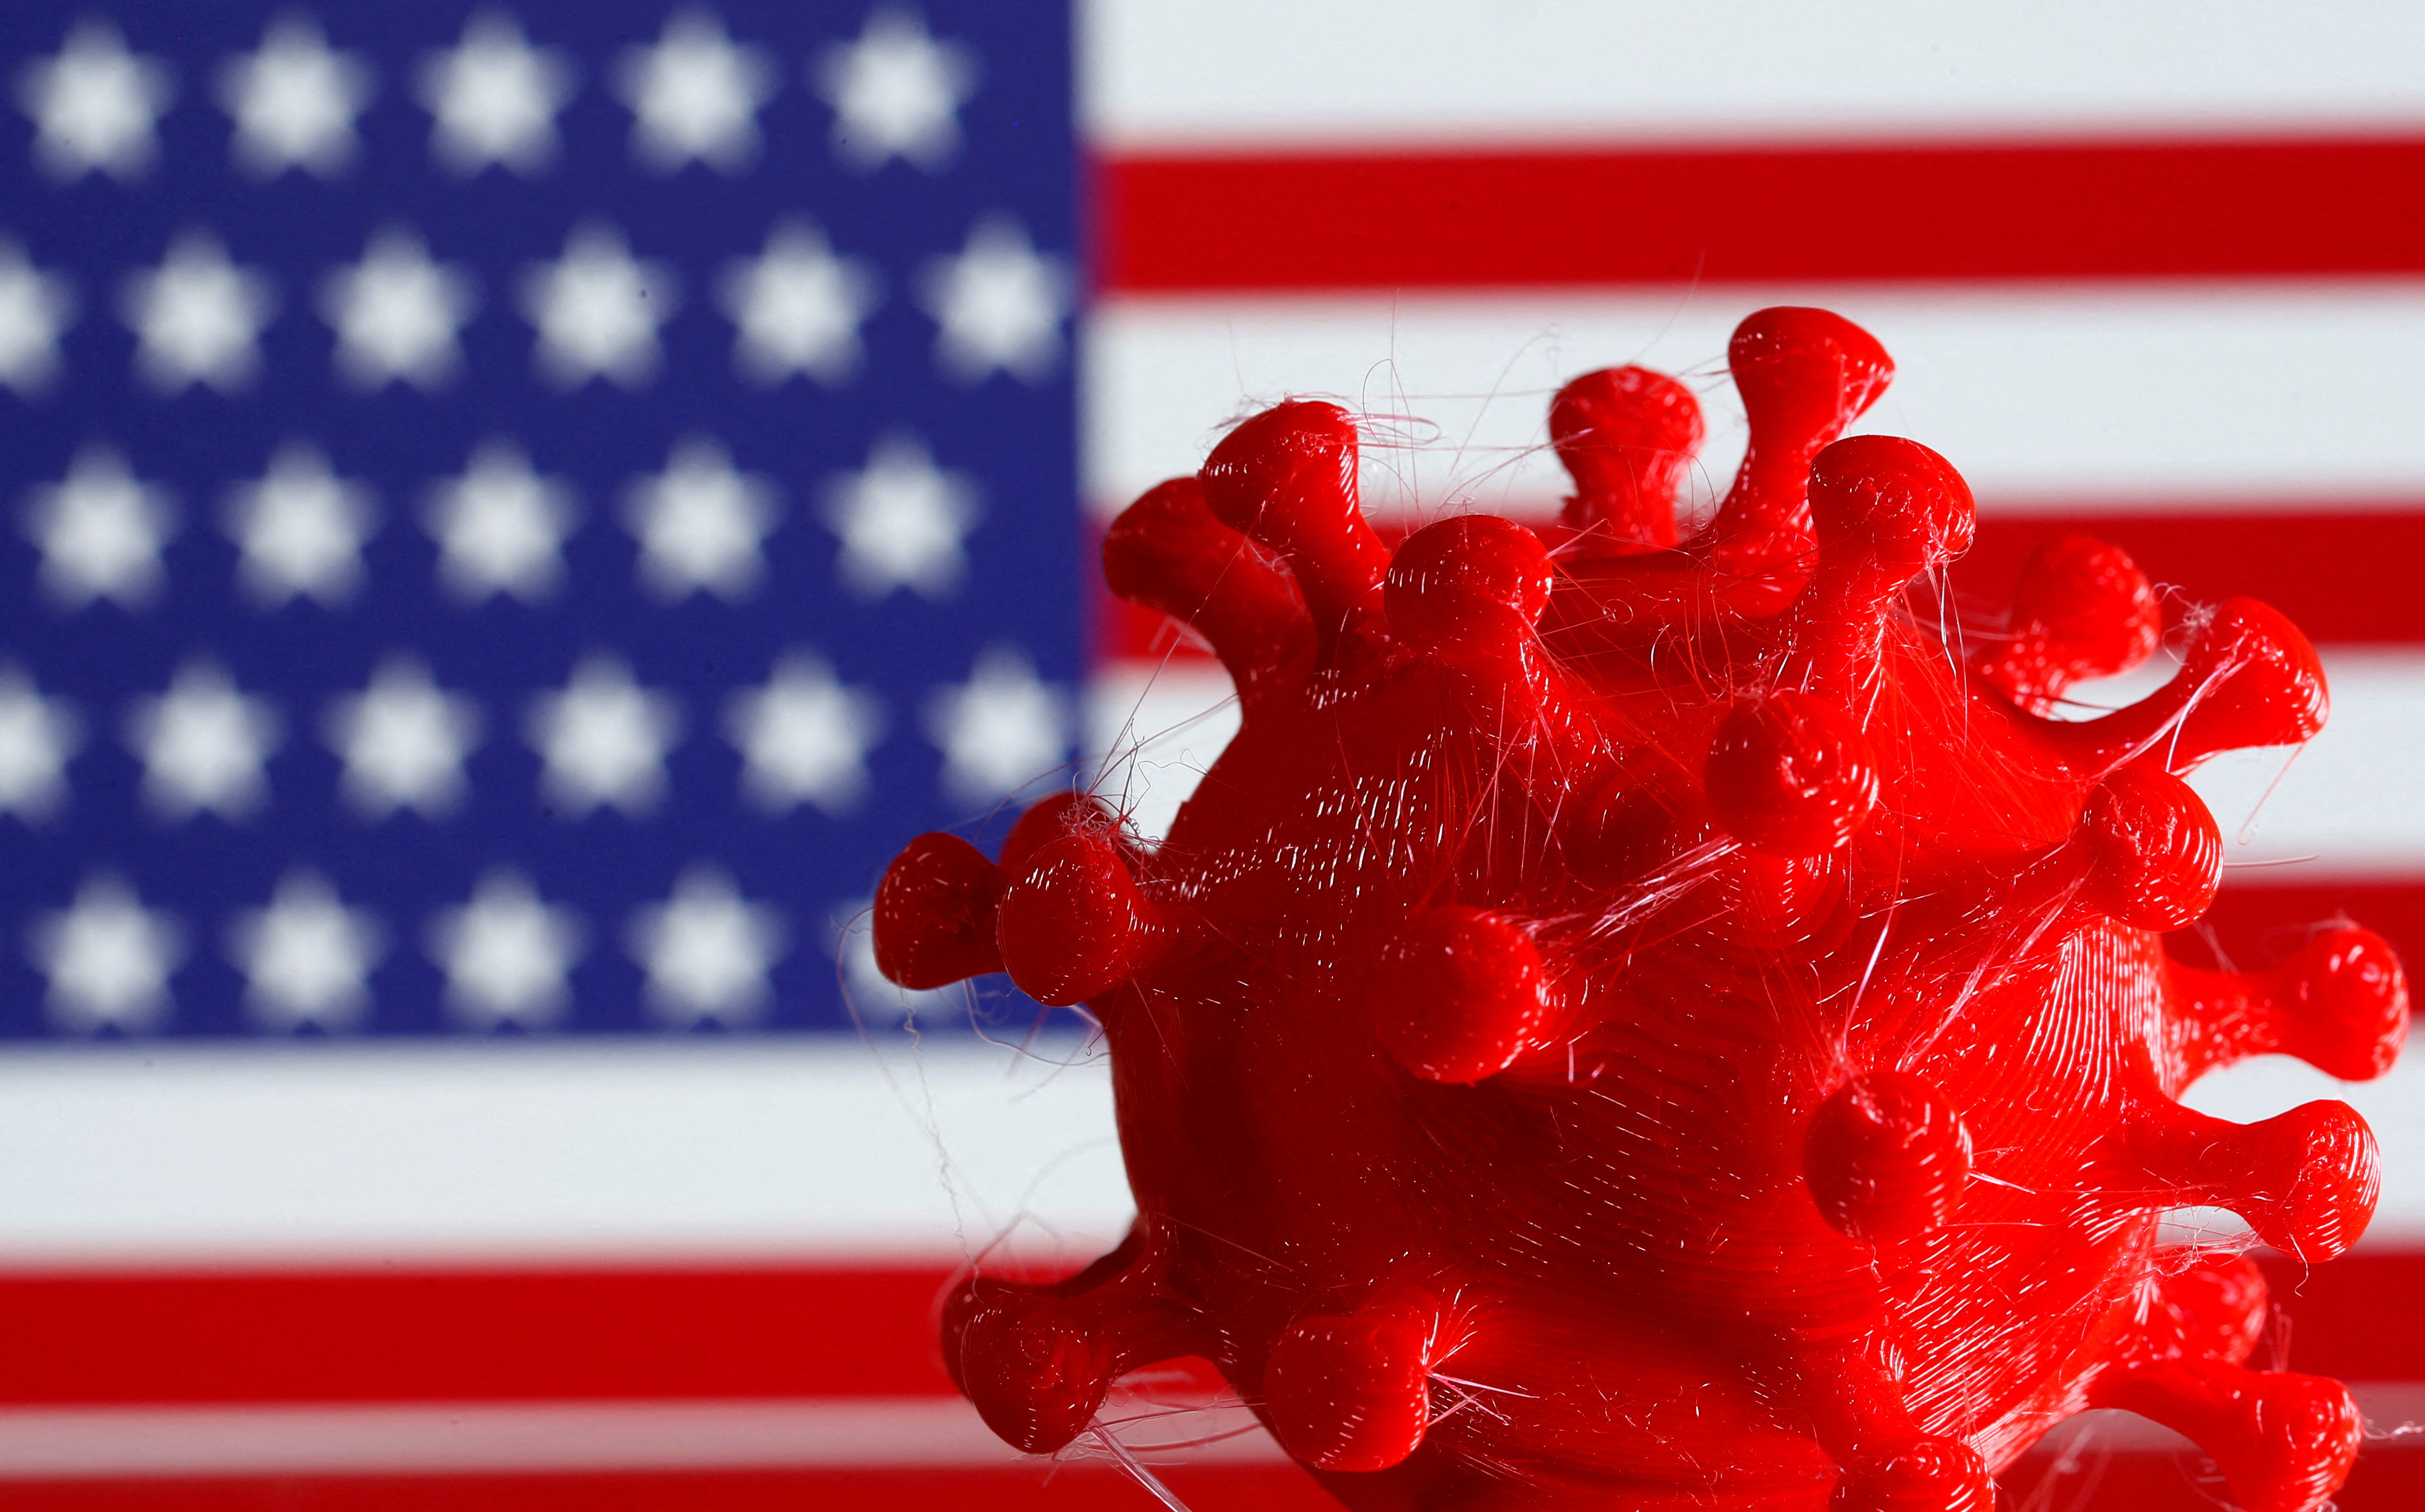 A 3D-printed coronavirus model is seen in front of a U.S. flag on display in this illustration